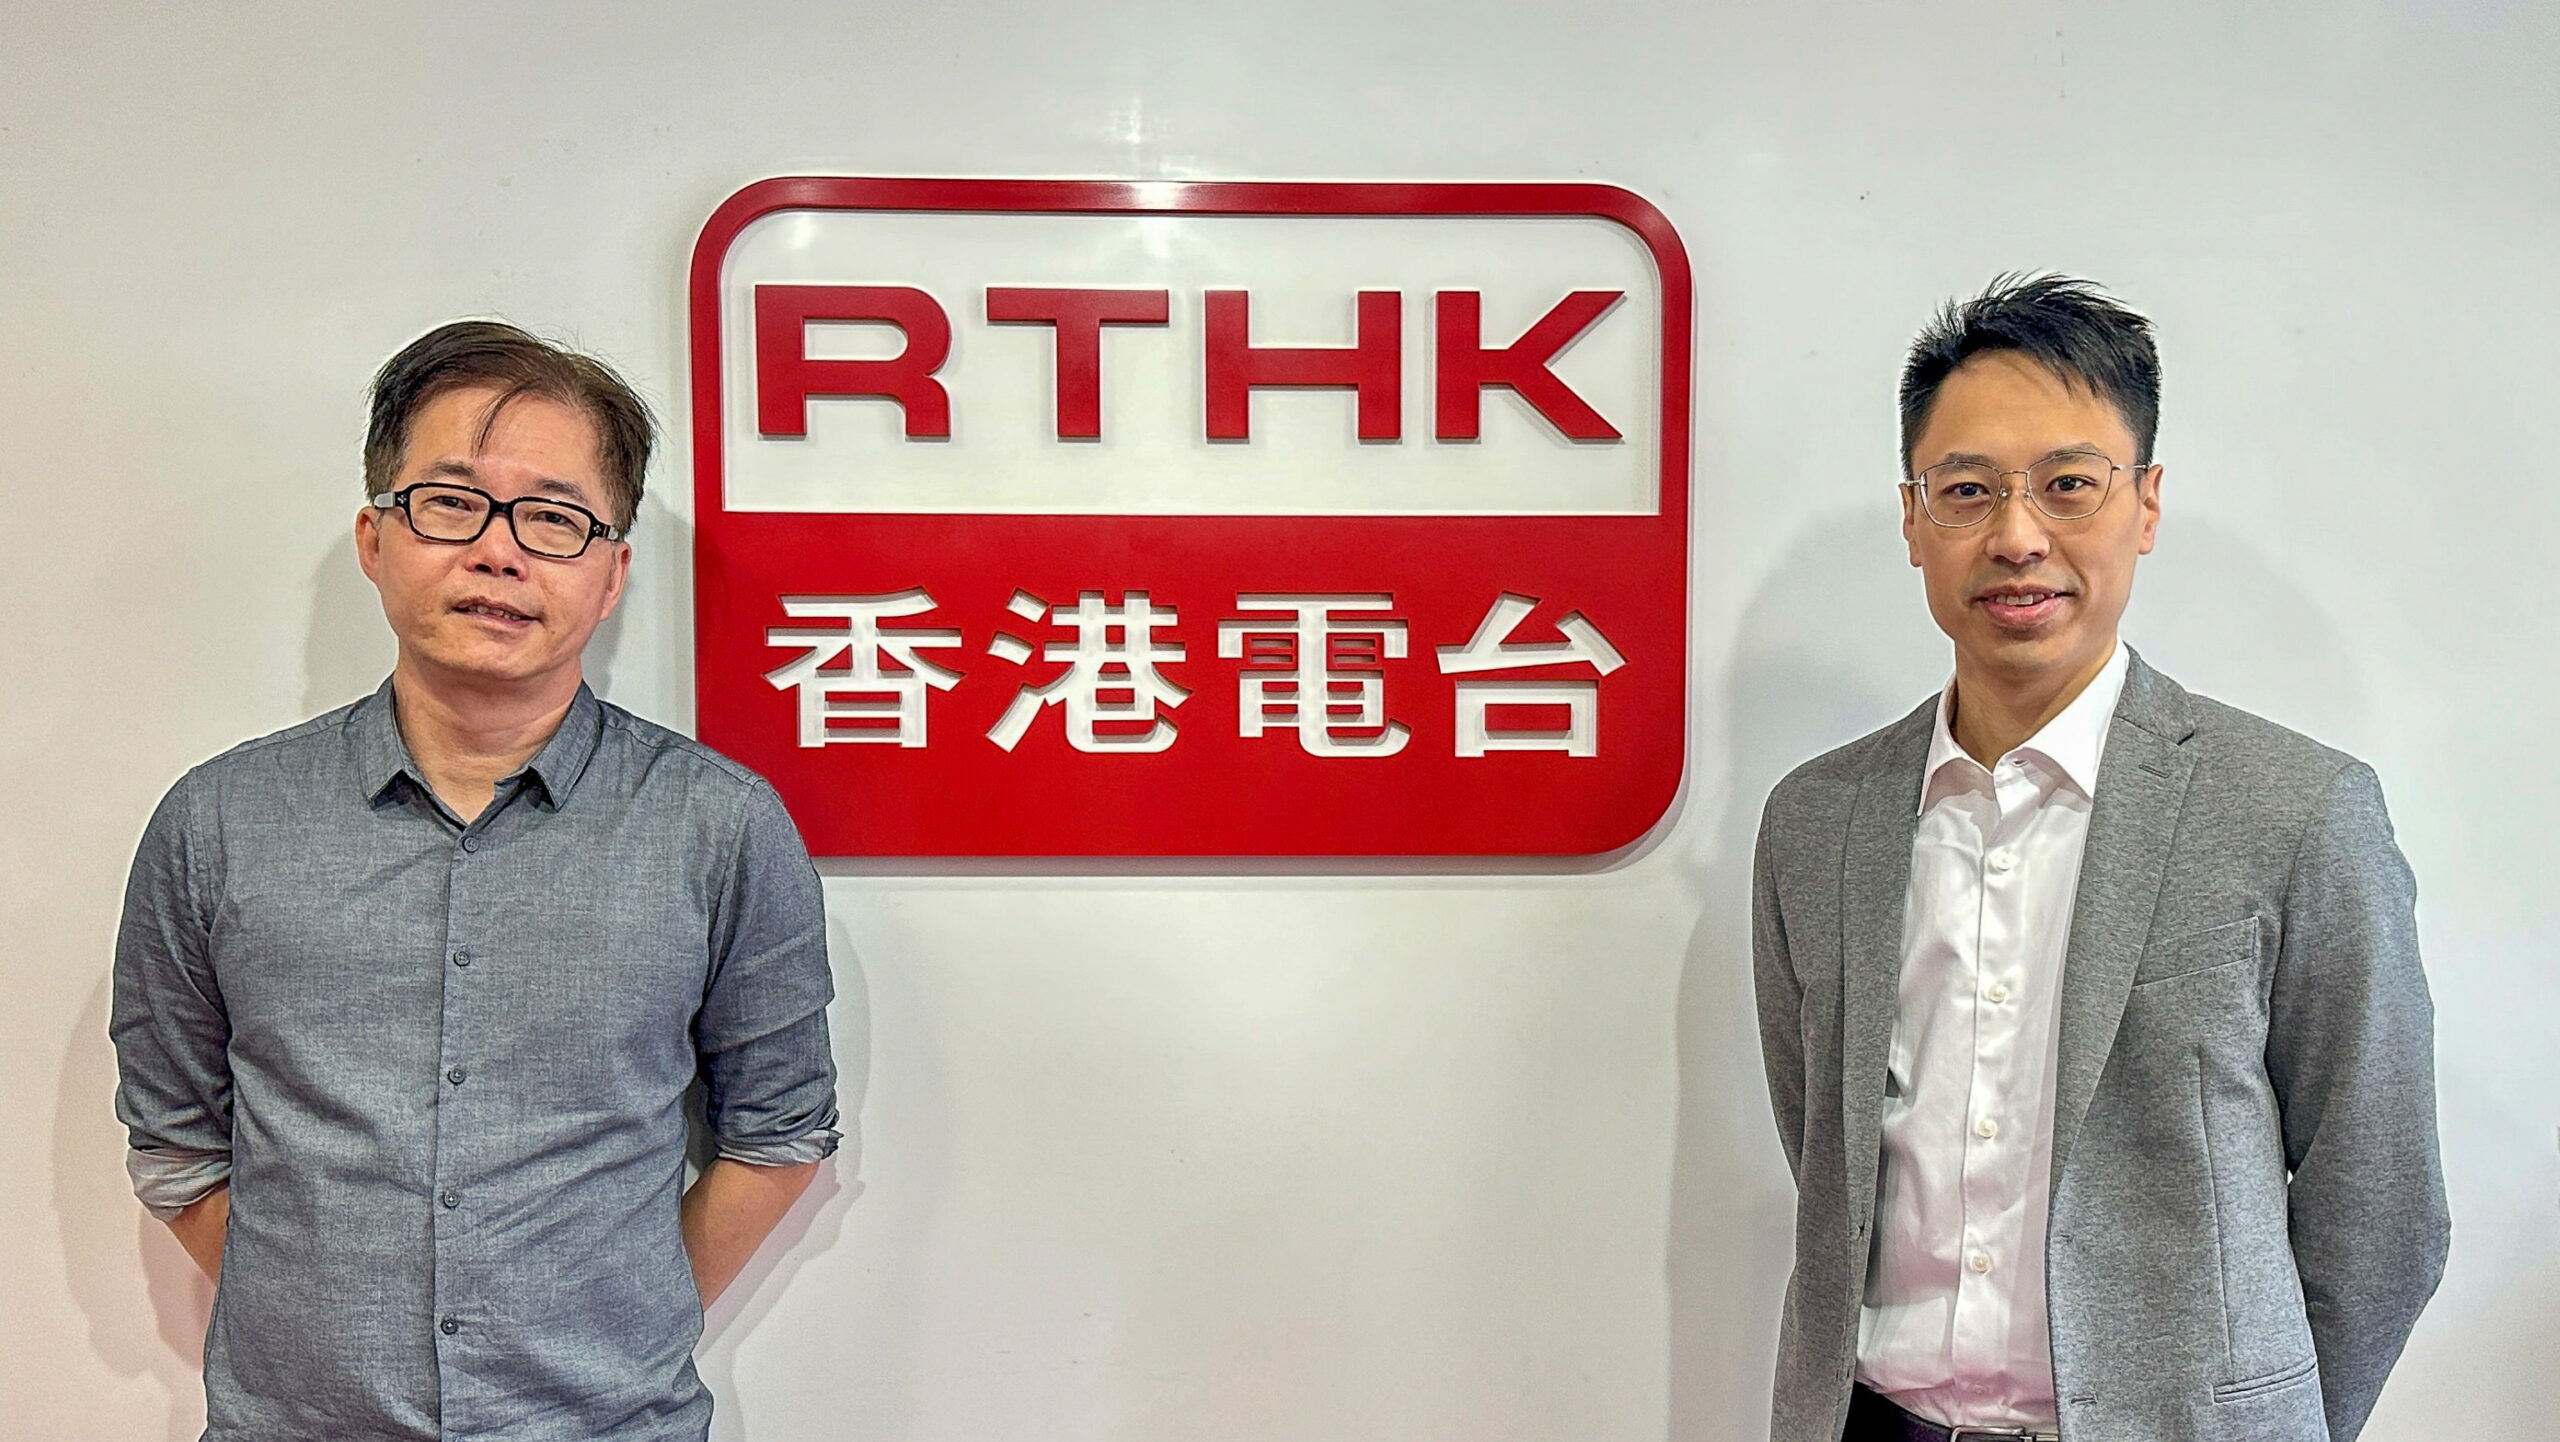 Invited to be Interviewed on Radio Television Hong Kong (RTHK) “一桶金” program